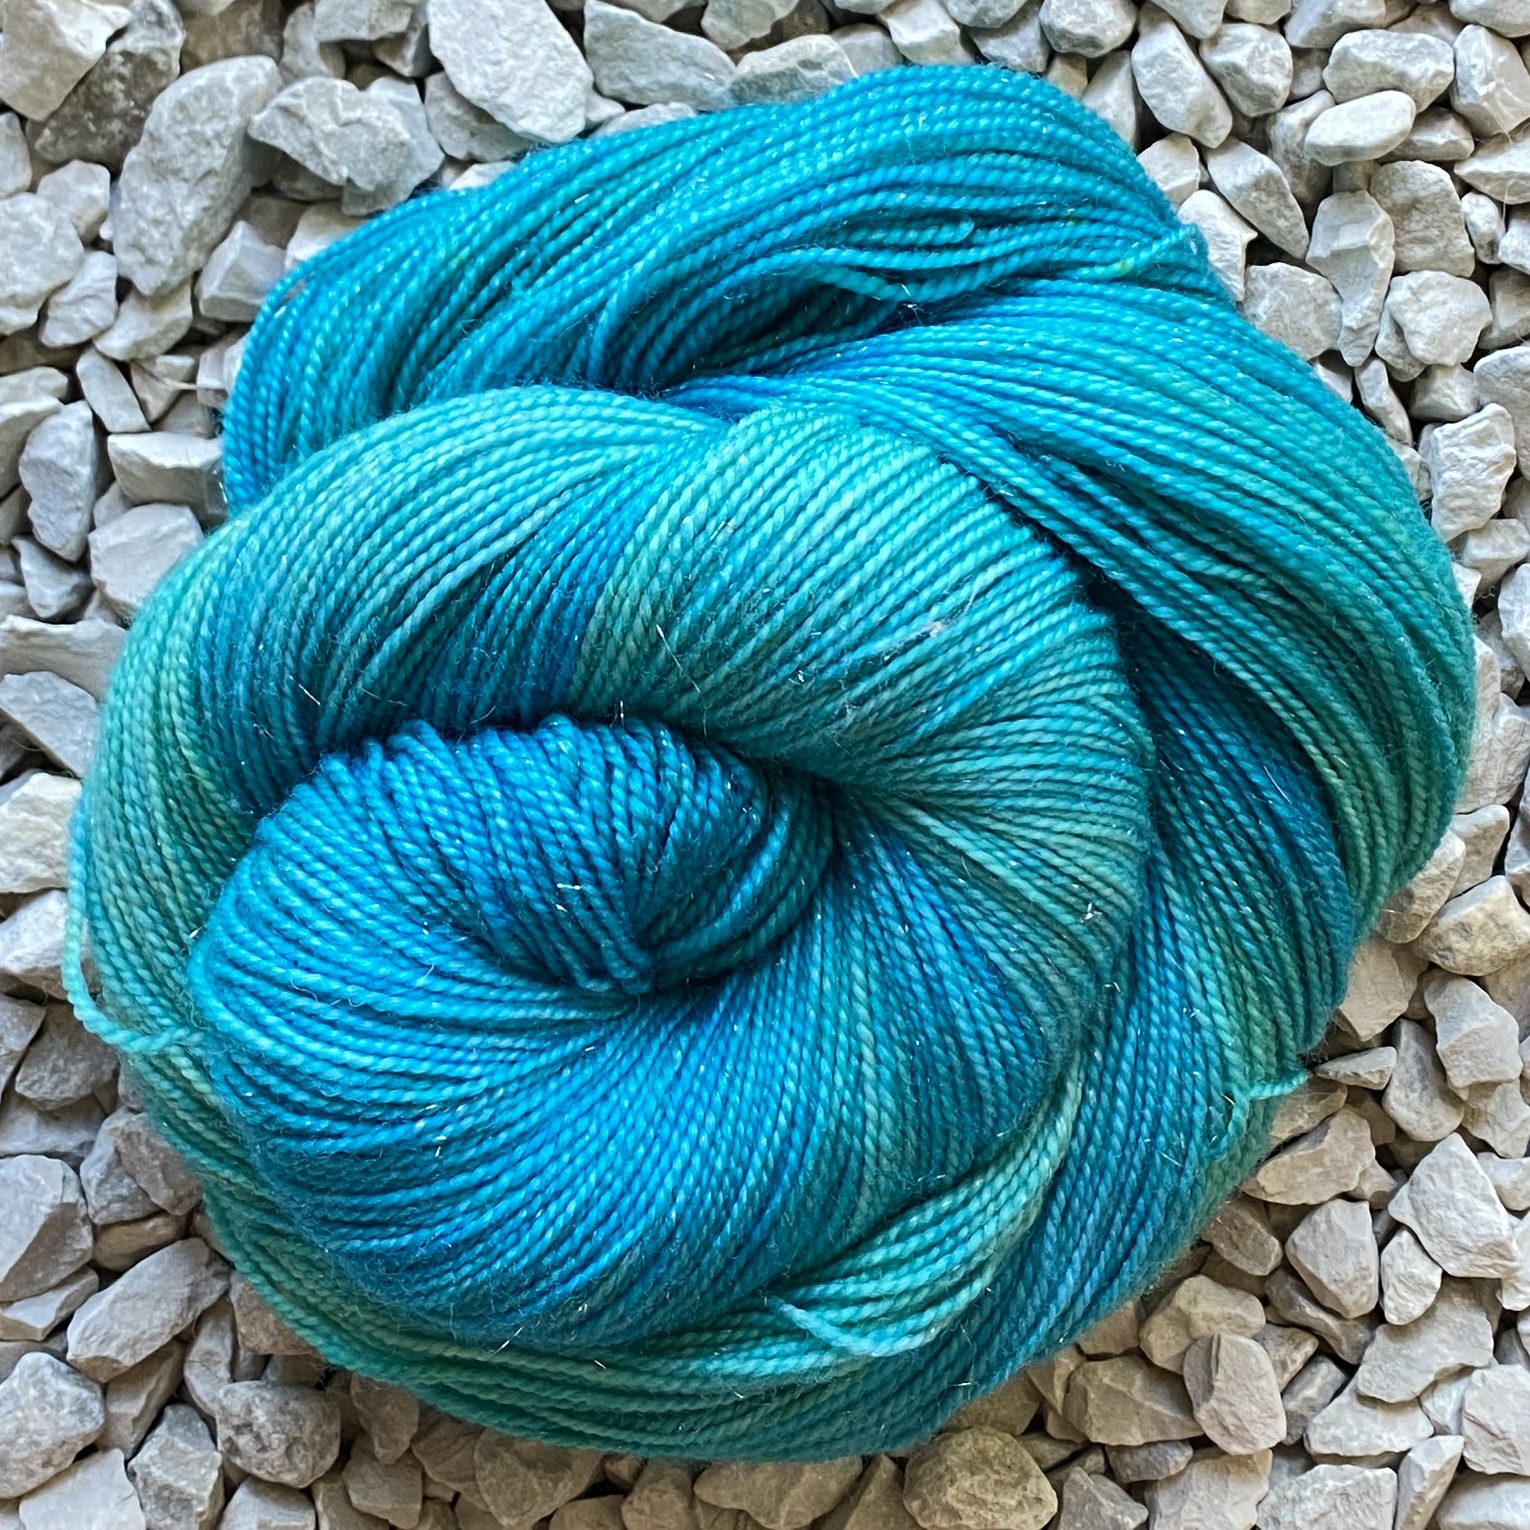 A Swirl of sparkly yarn hand-dyed in a blend of sea greens and sea blues